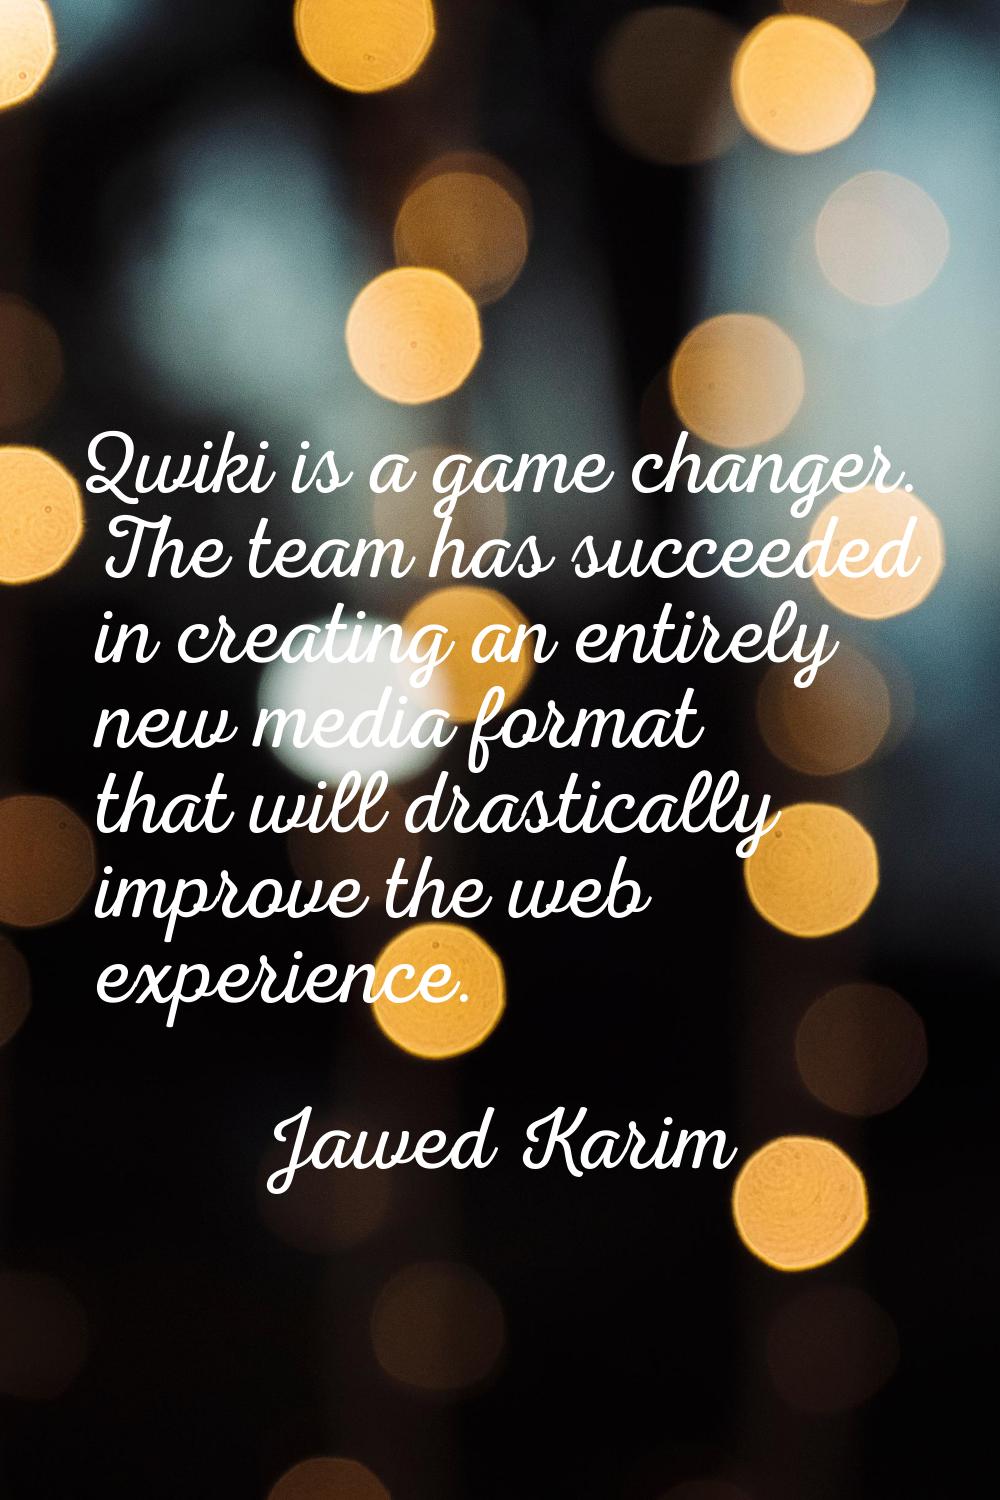 Qwiki is a game changer. The team has succeeded in creating an entirely new media format that will 